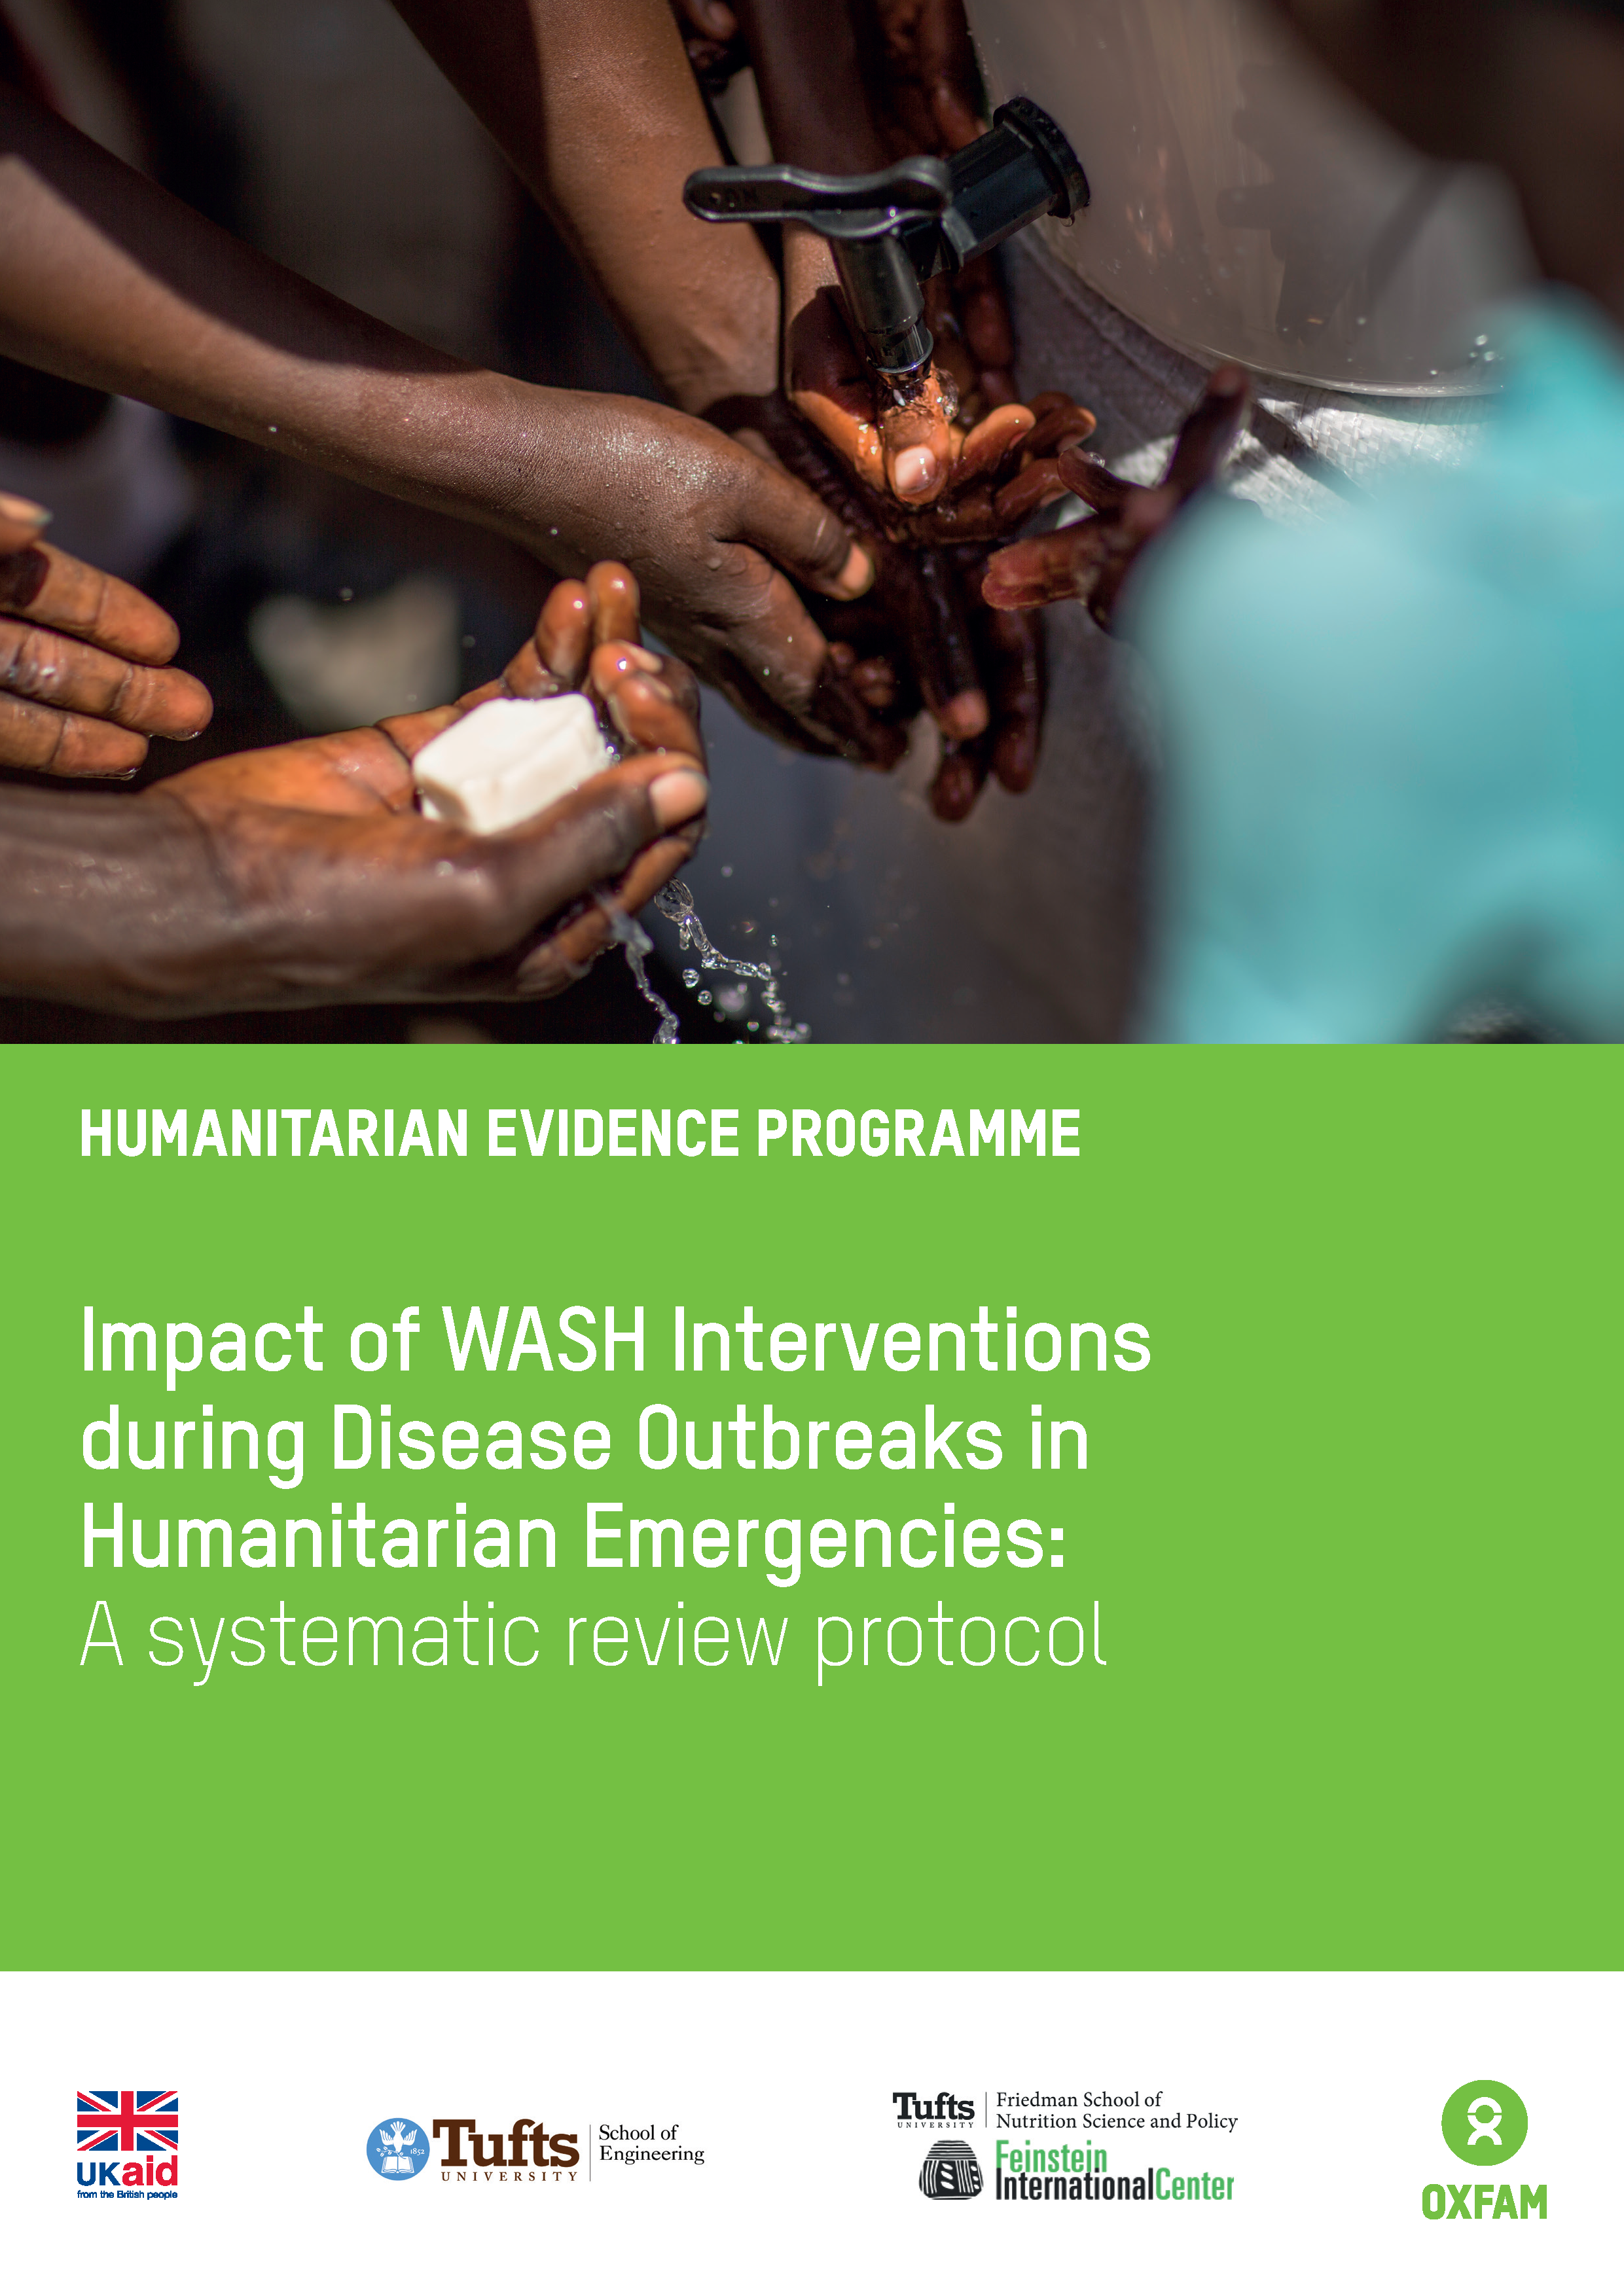 WASH Interventions during Disease Outbreaks